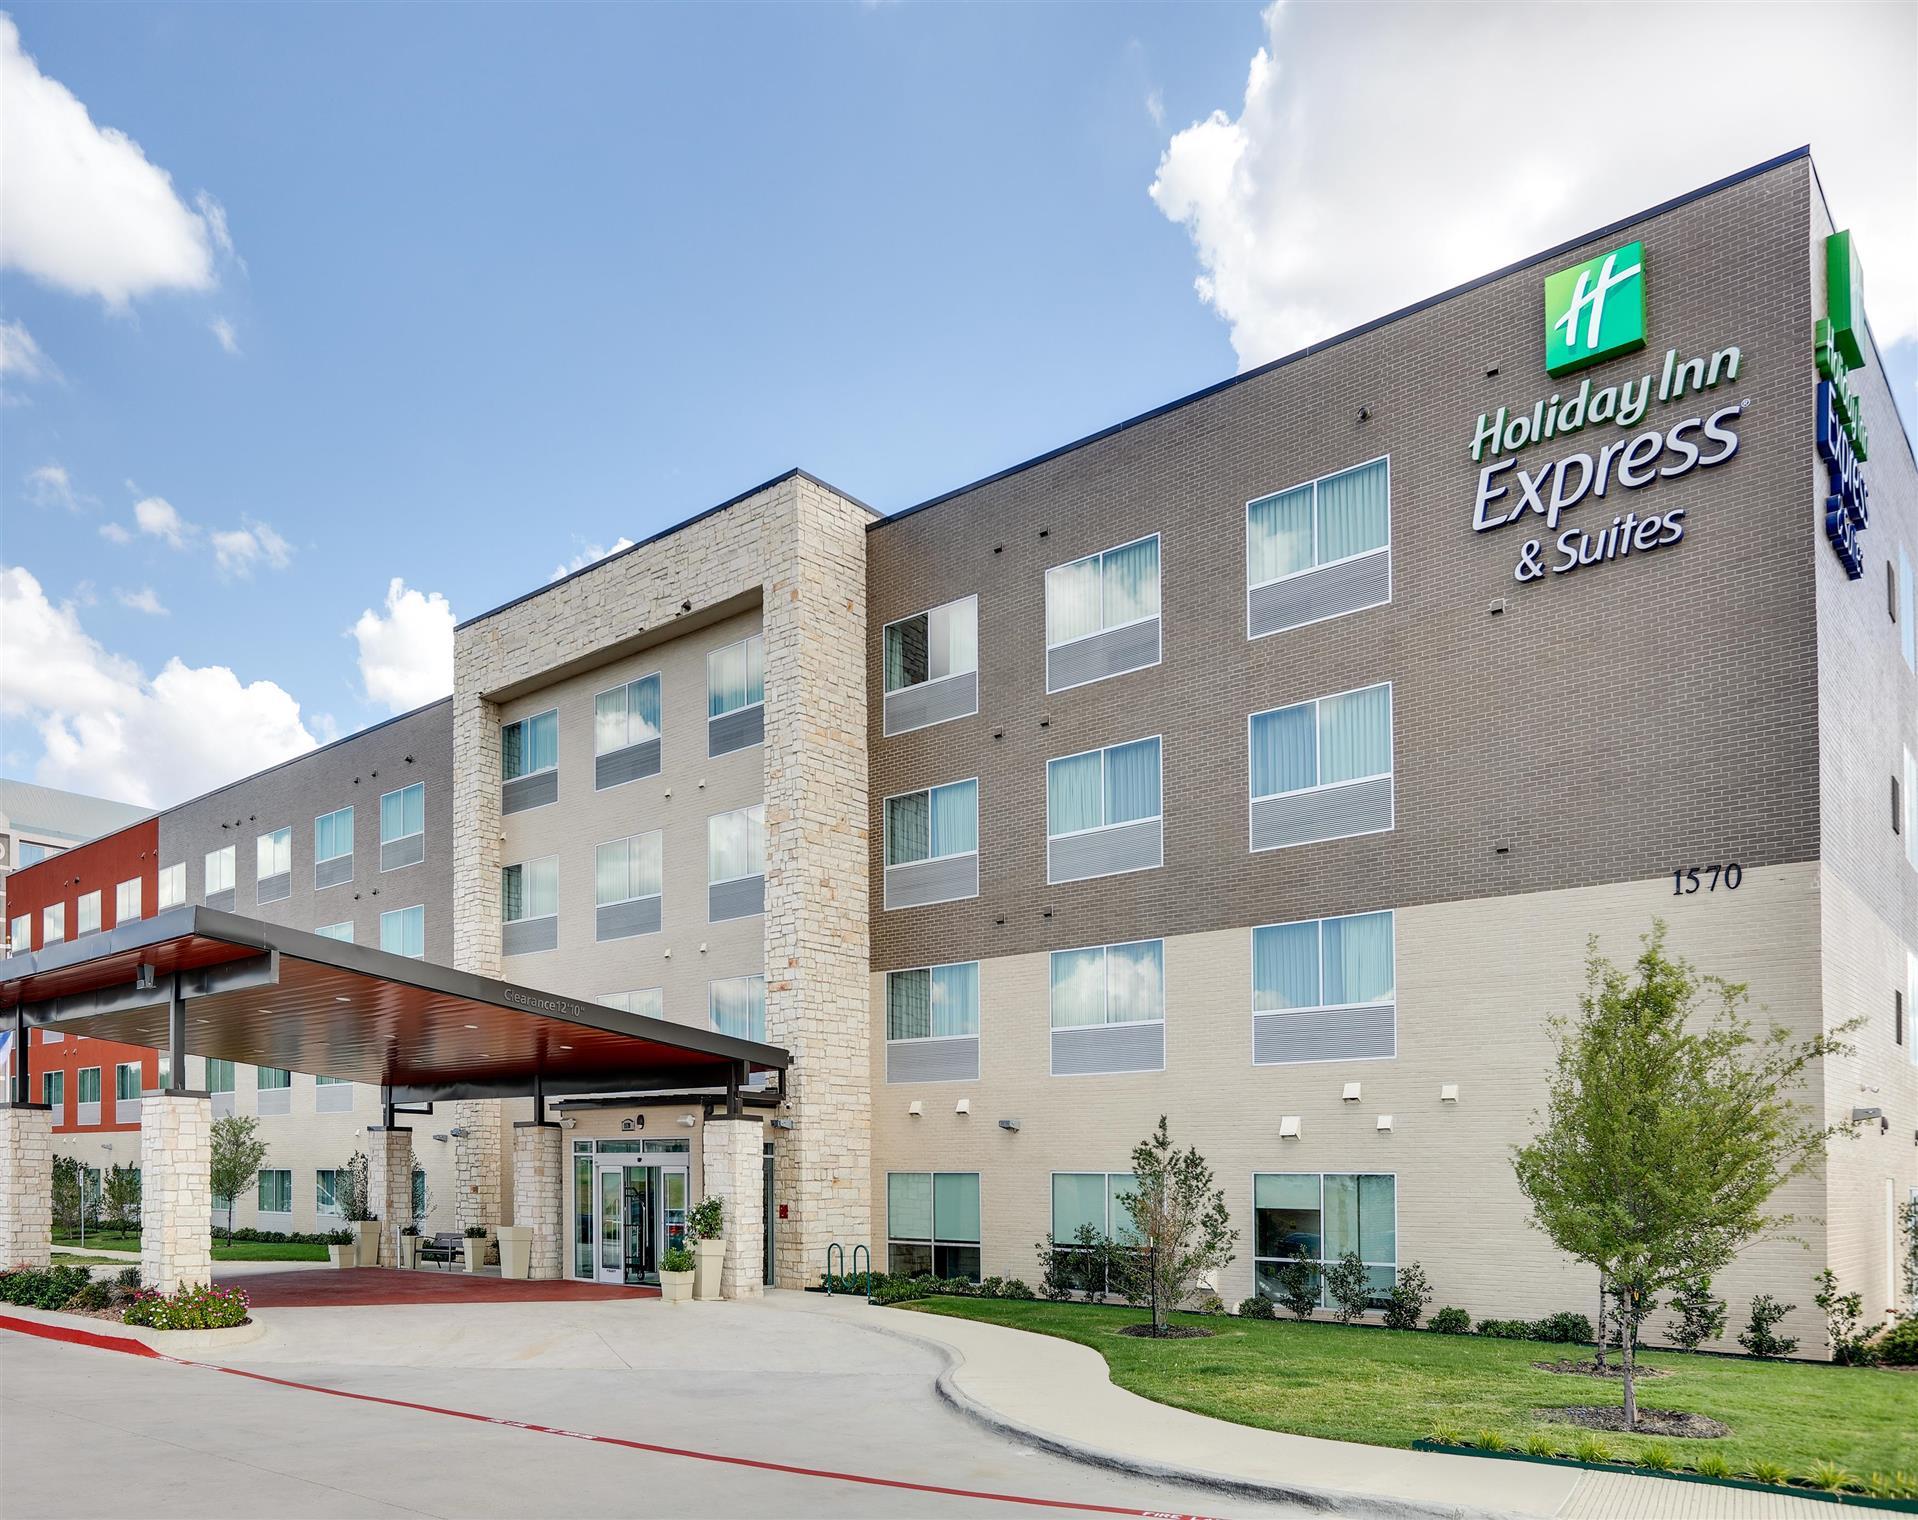 Holiday Inn Express & Suites Farmers Branch in Farmers Branch, TX